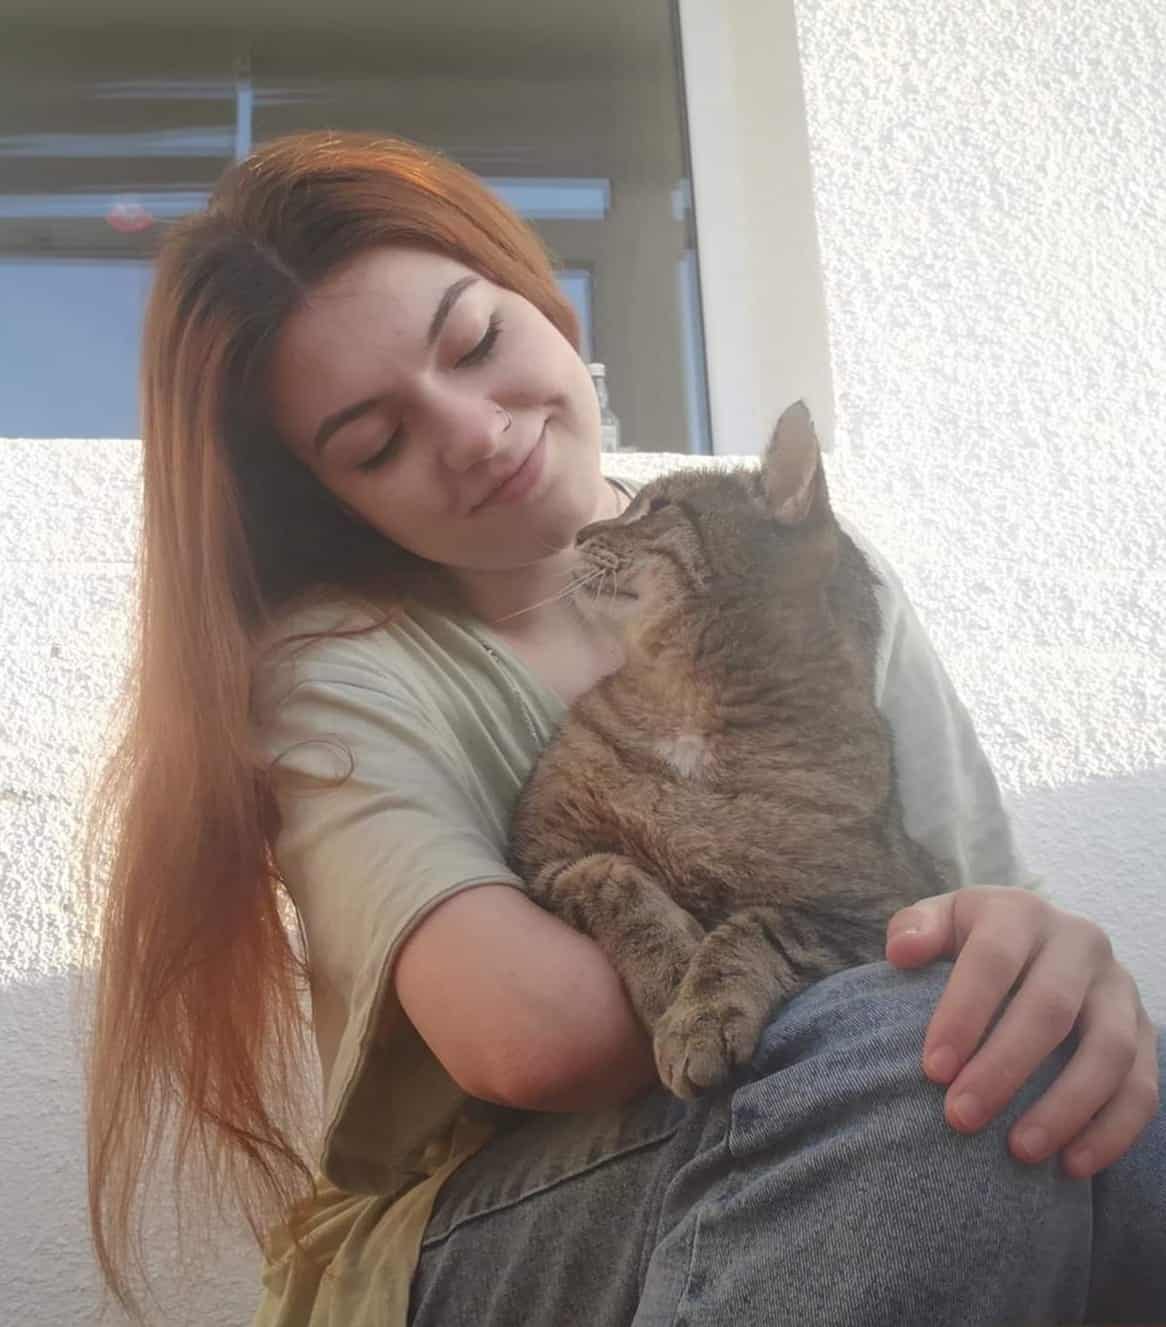 May be an image of 1 person and cat